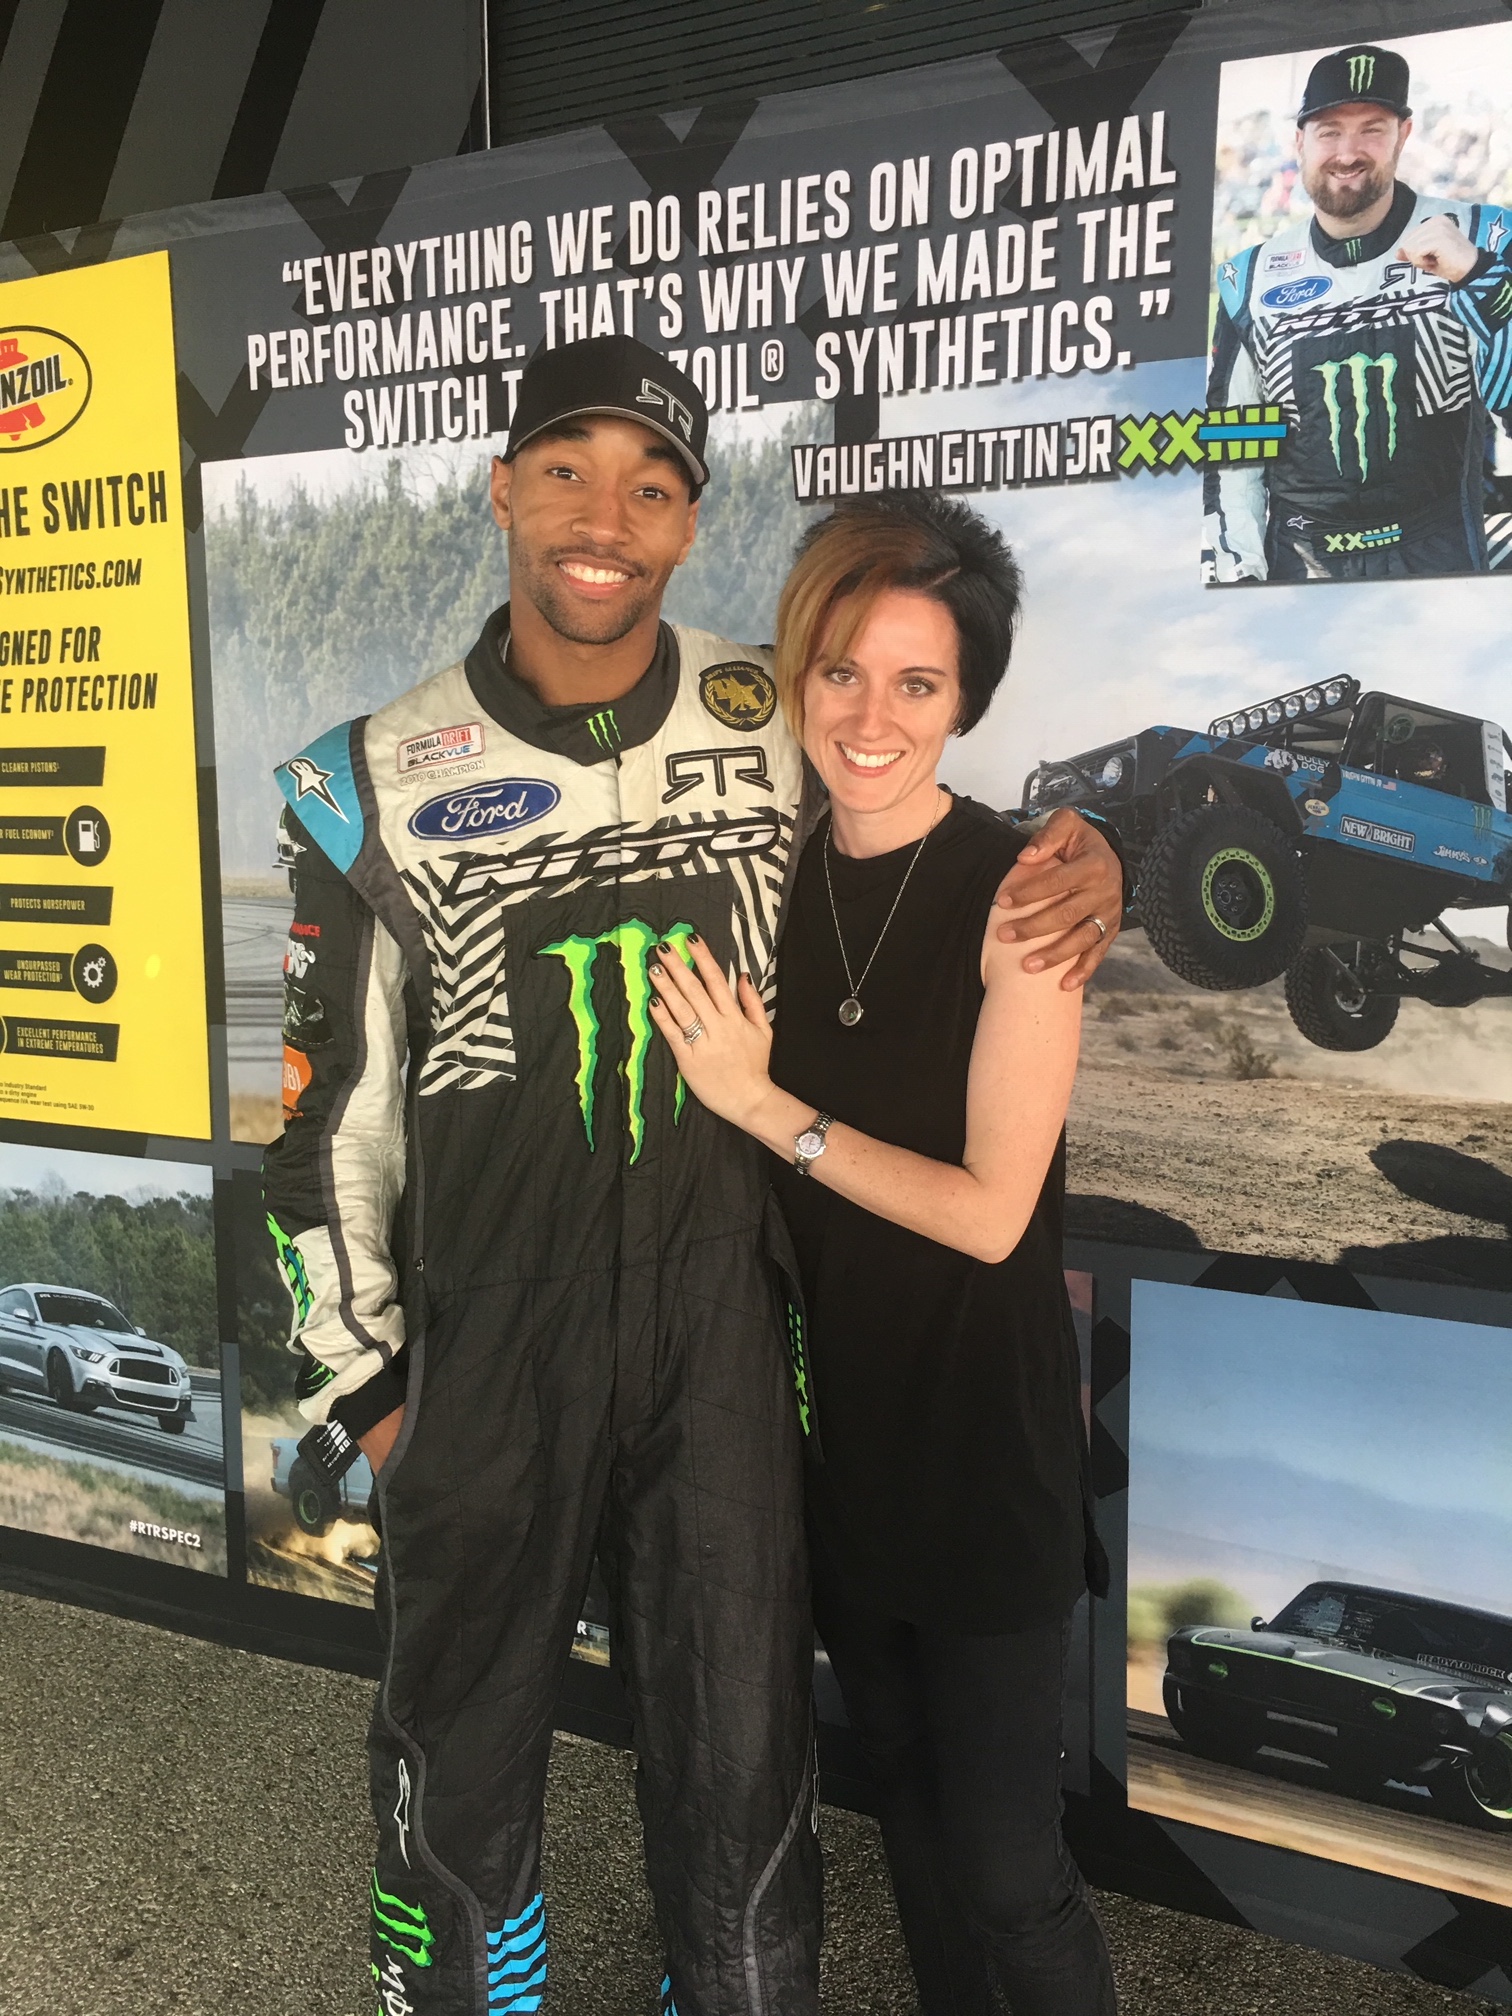 MAHLExRTR social media promotion grand-prize winner Robert Lewis and his wife, Vanessa Lewis, enjoyed themselves April 4-5 at th